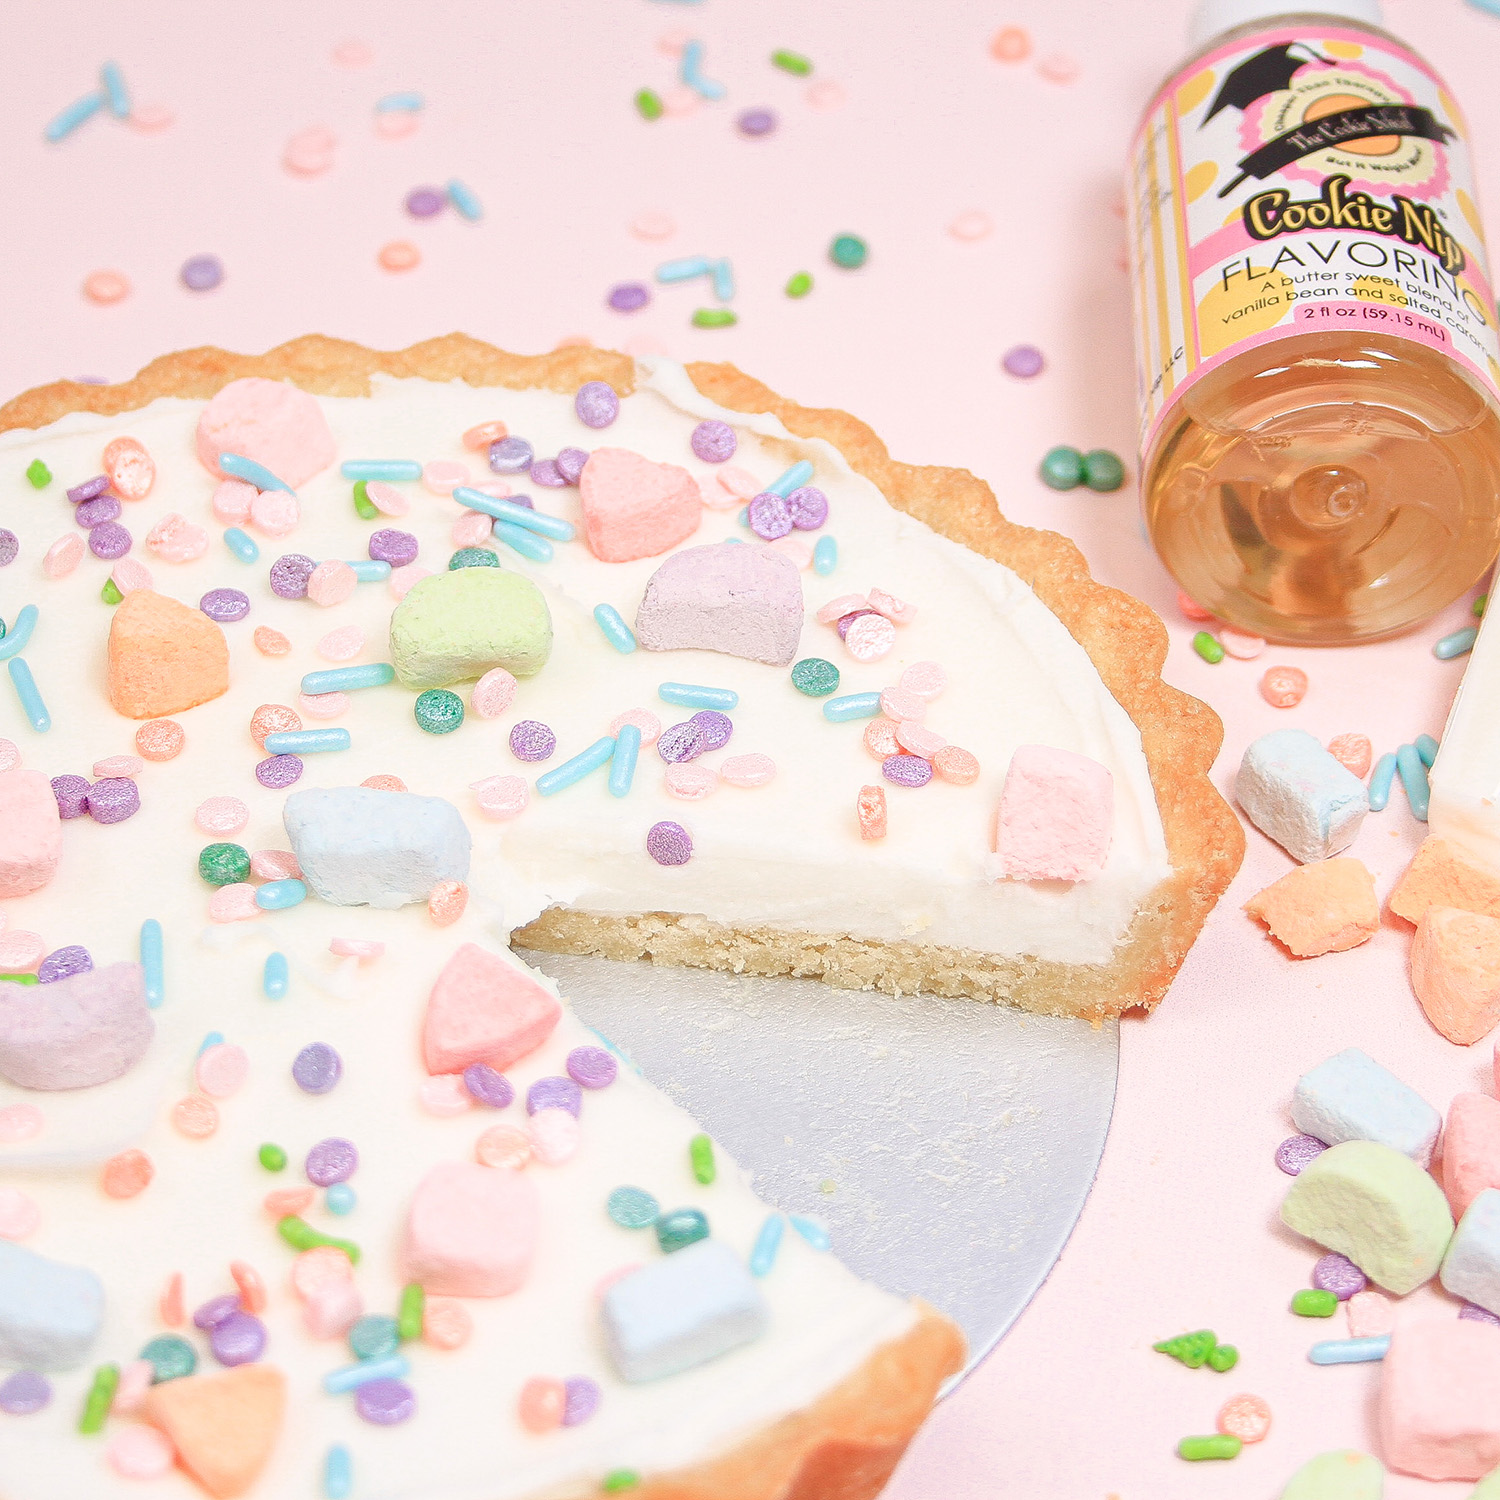 Learn how to create a Sugar Cookie Tart adorned with Lucky Charm marshmallows.